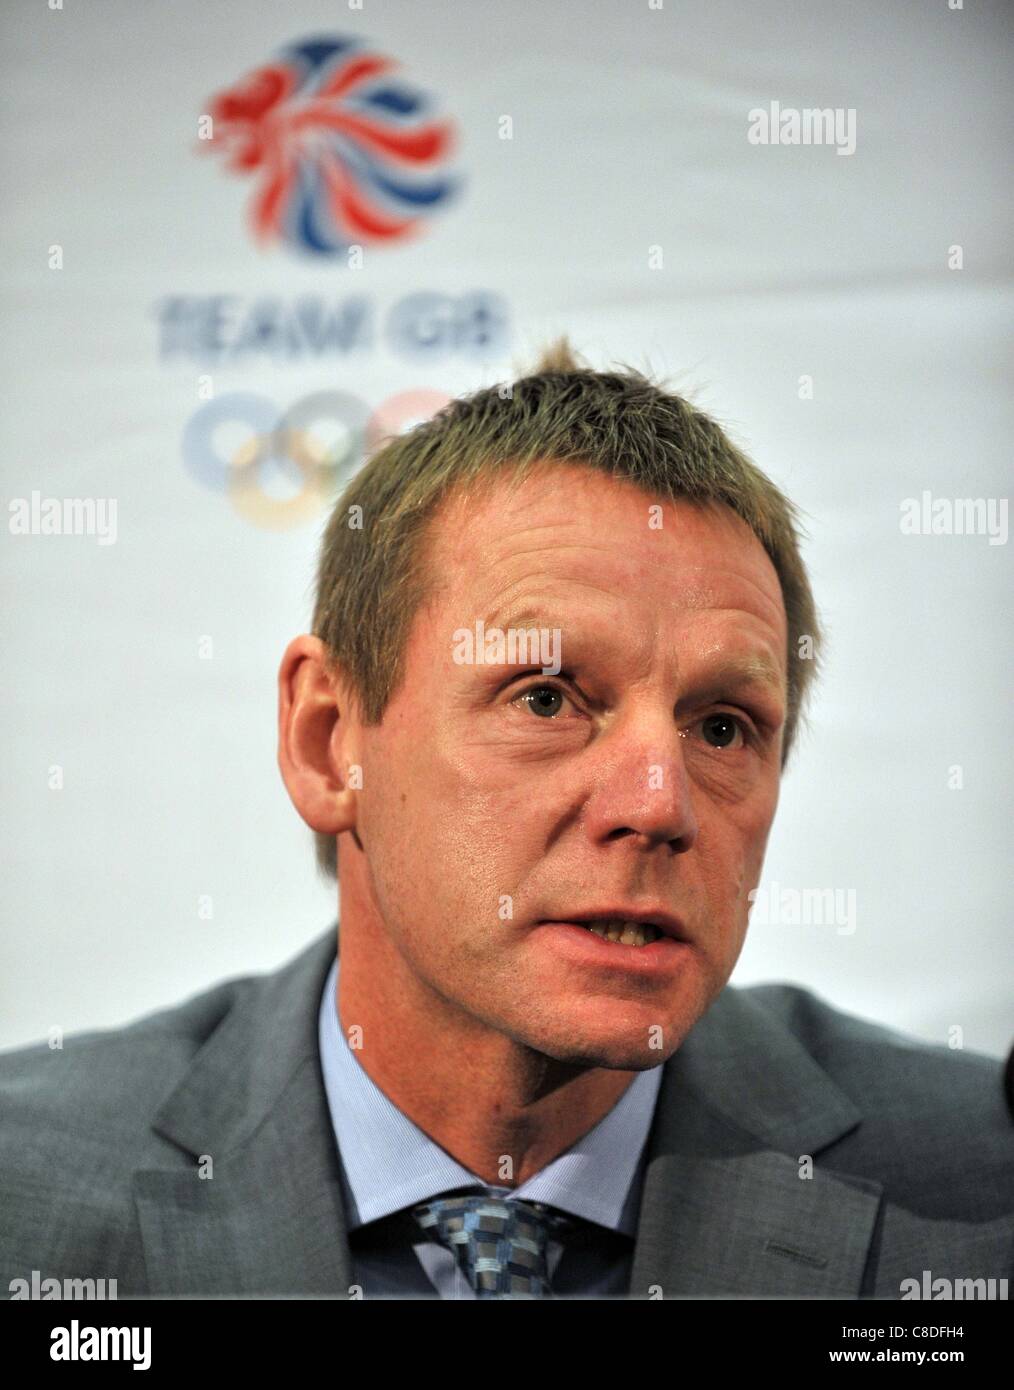 WEMBLEY STADIUM, LONDON, UK, Thursday 20/10/2011. Manger of the mens 2012 Olympic British football team Stuart Pearce. English Football Association (FA) press conference announcing Team GB mens and womens football team managers for London 2012 Olympics. Stock Photo